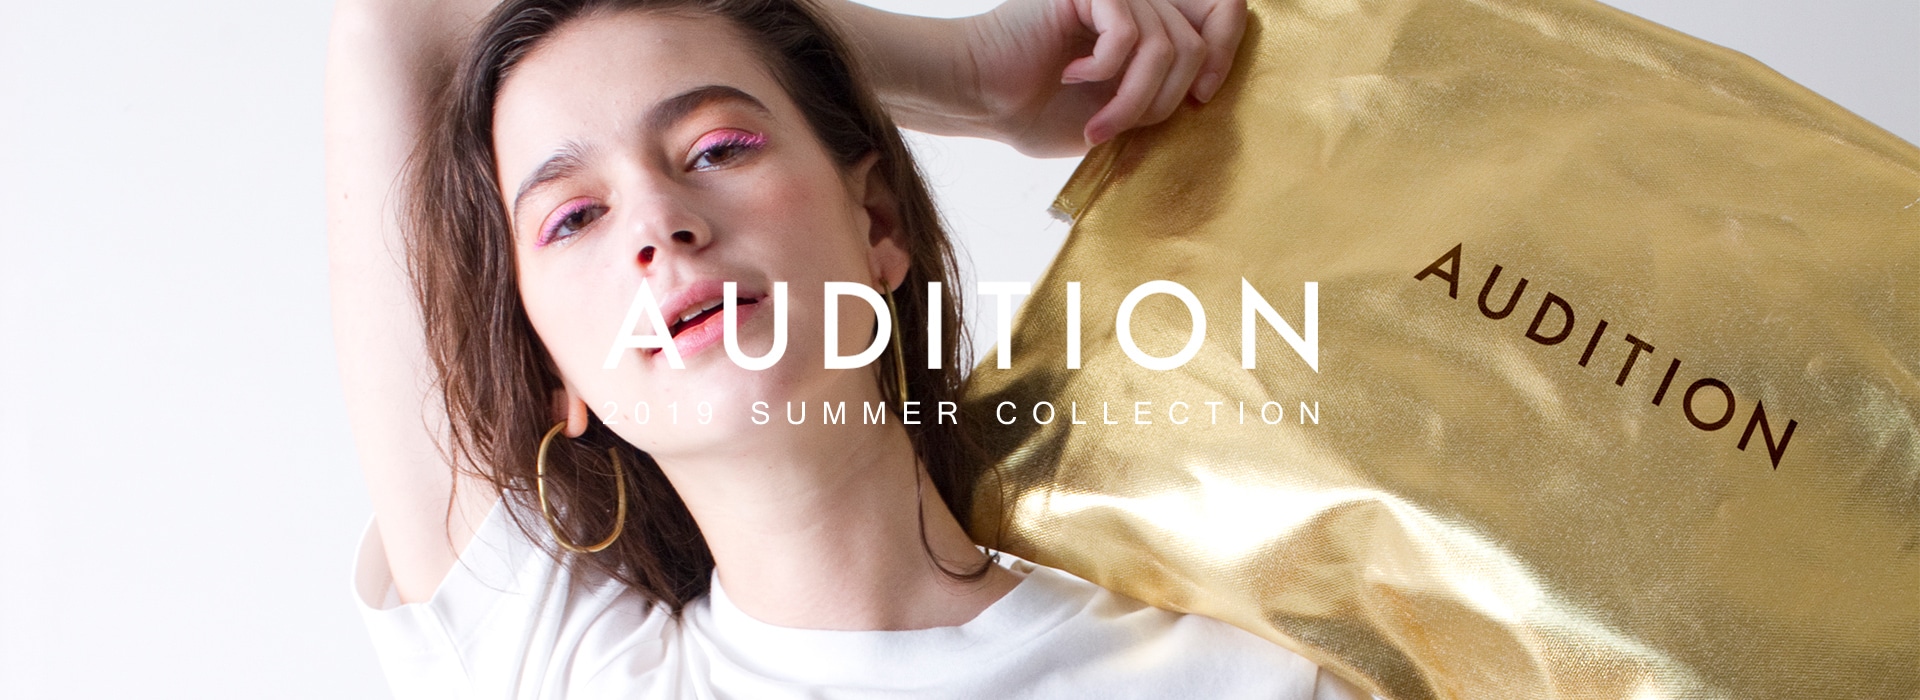 AUDITION 2019 SUMMER COLLECTION